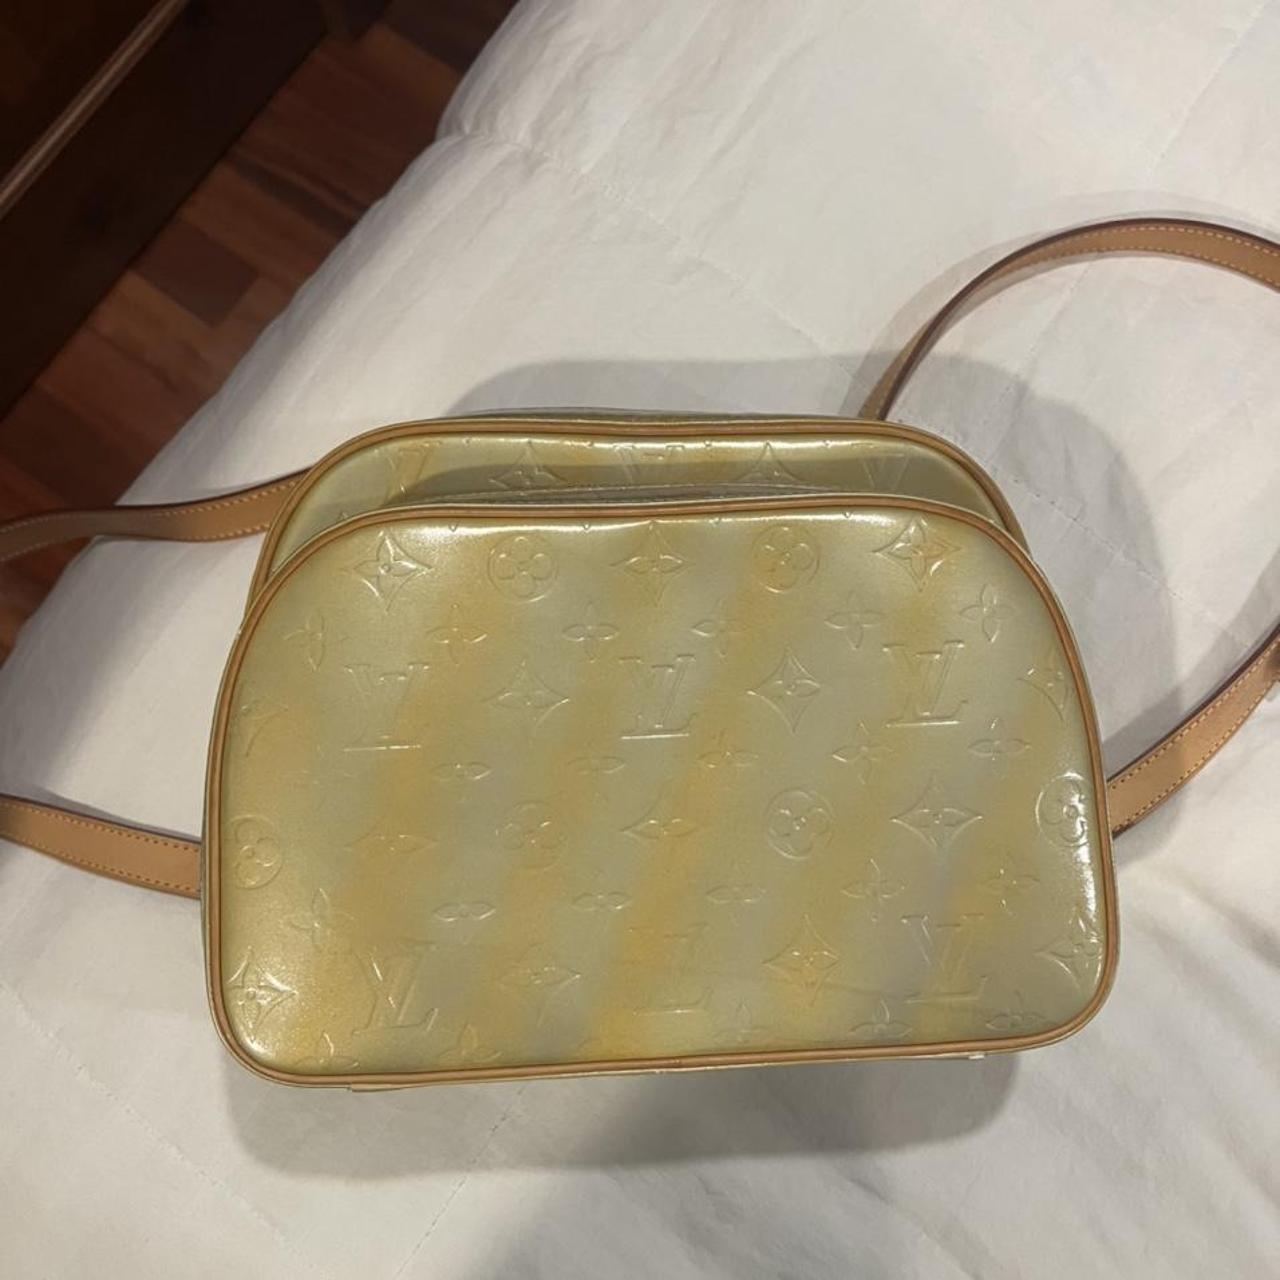 Free shipping! Louis Vuitton Bosphore backpack. Very - Depop